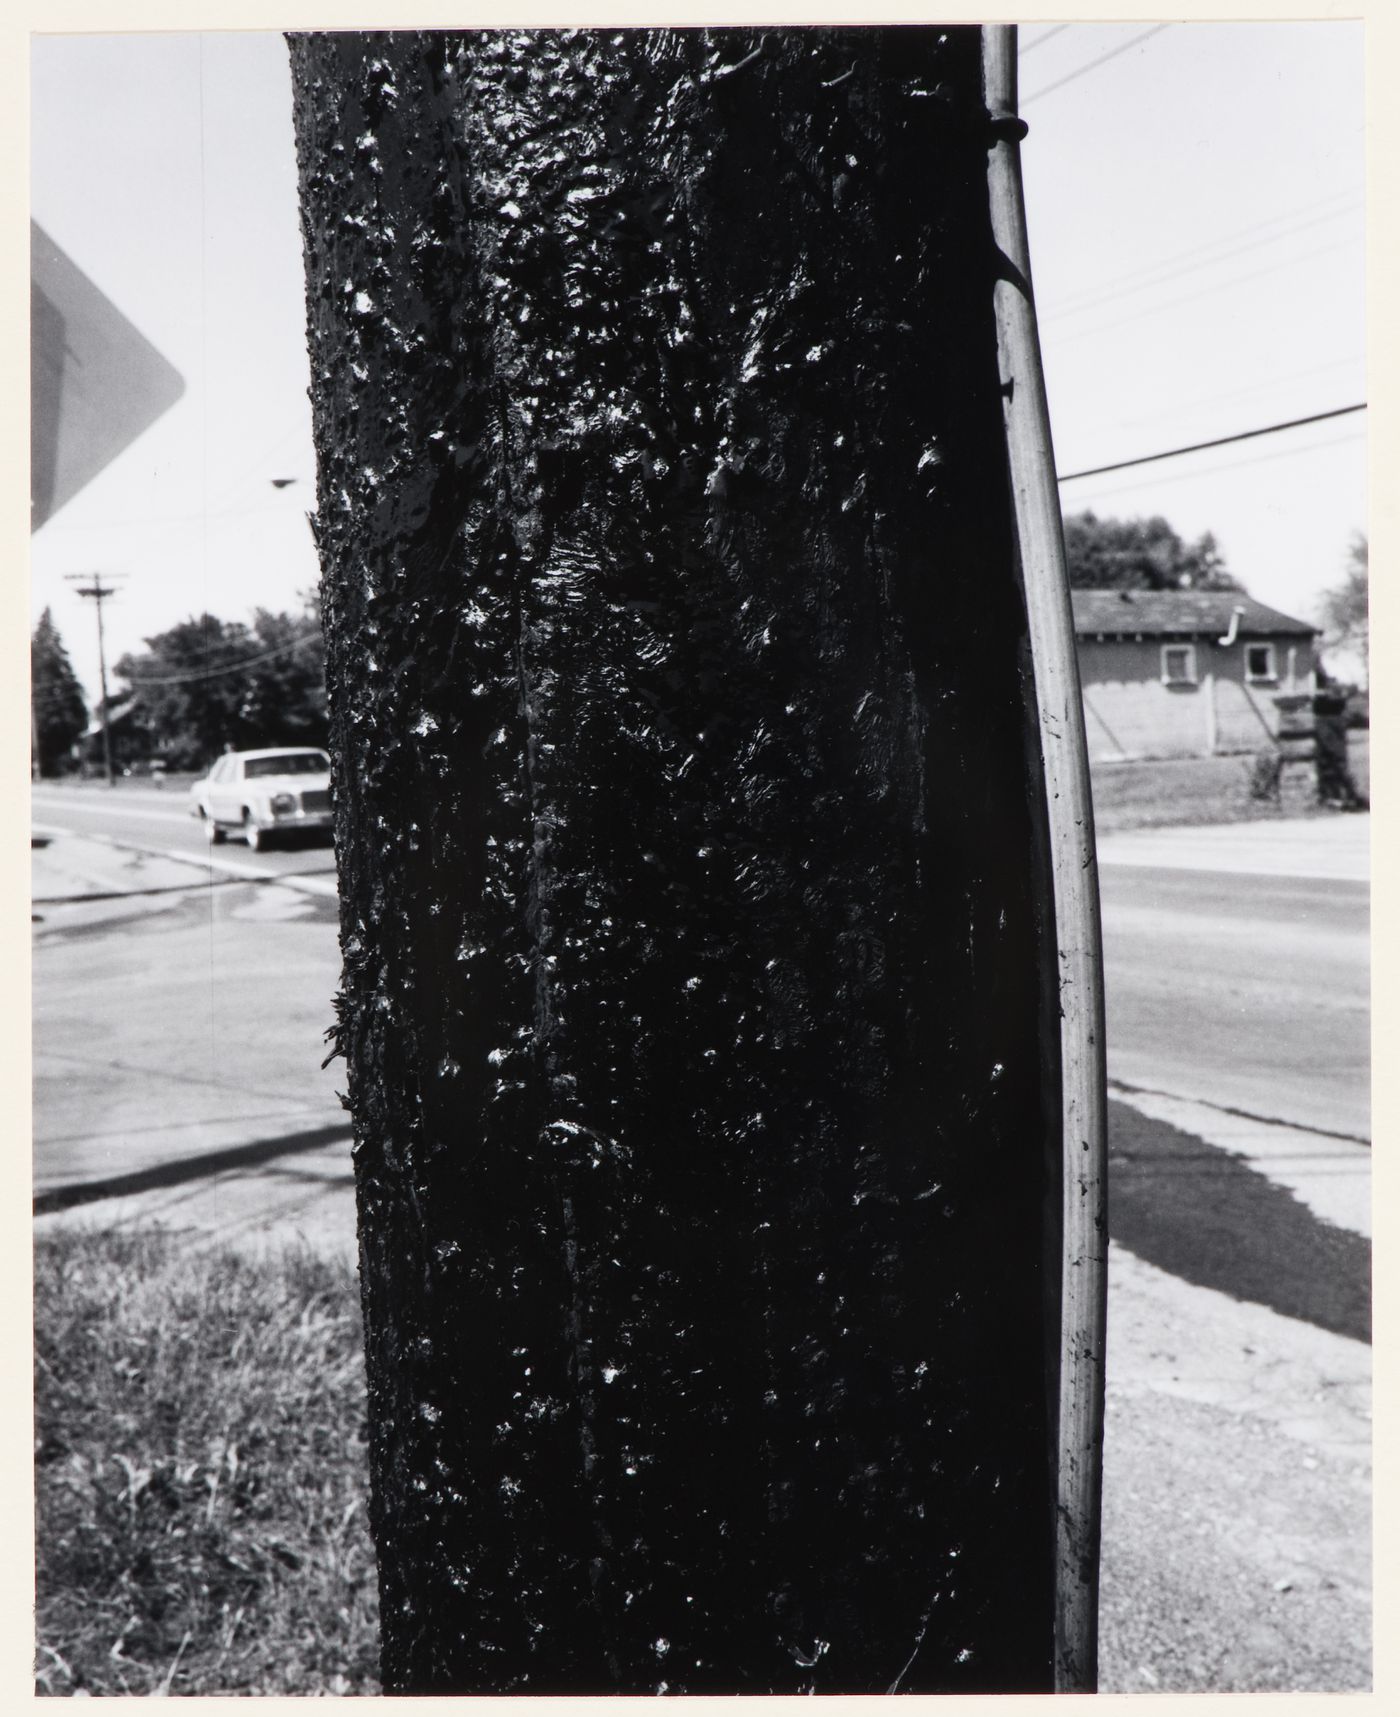 View of a utility pole showing roads, an automobile and a house in the background, New York State